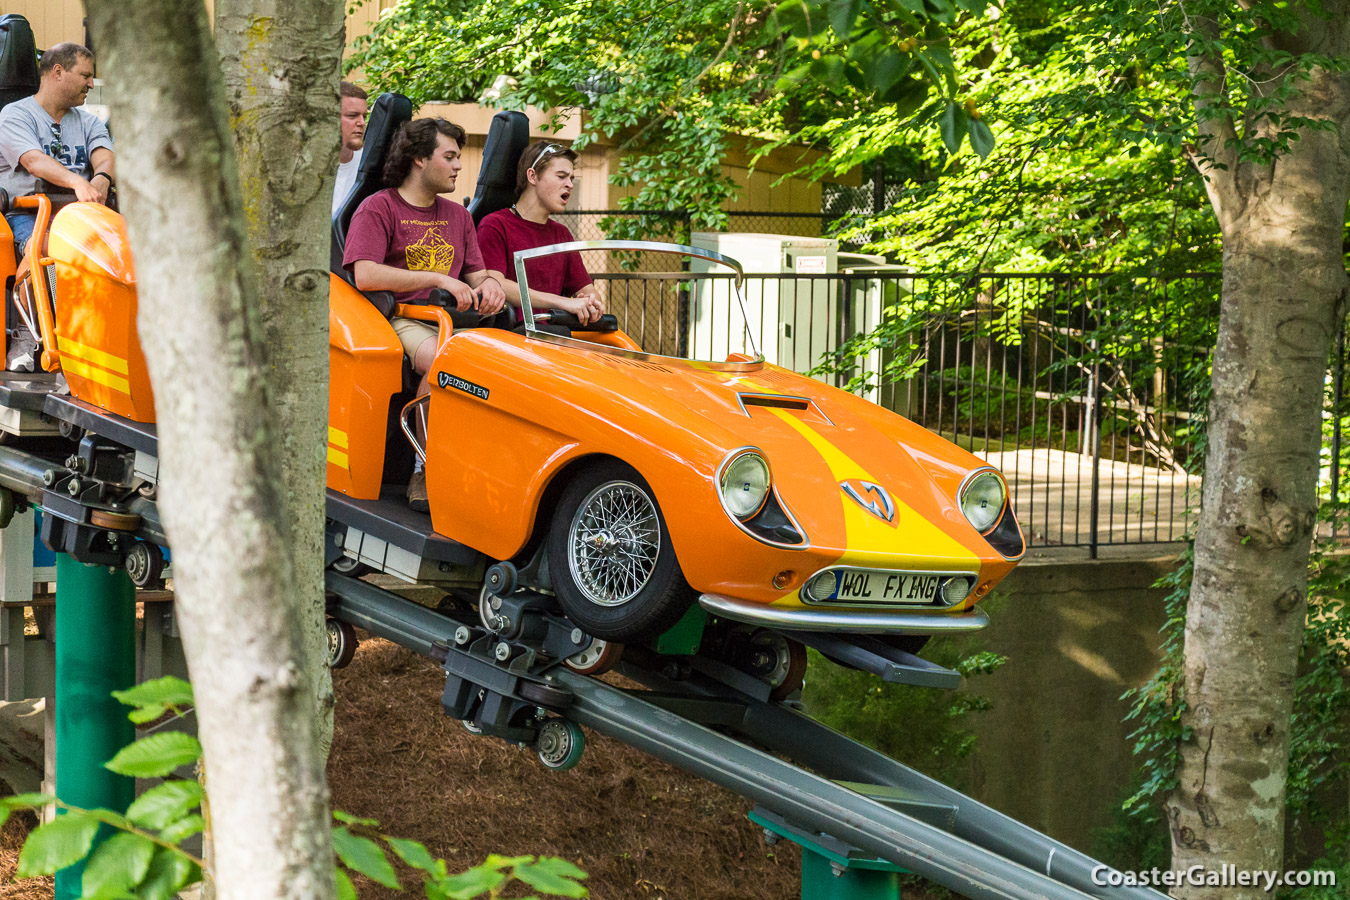 Automotive design of the cars on the Verbolten coaster at Busch Gardens - Stock photography by CoasterGallery.com